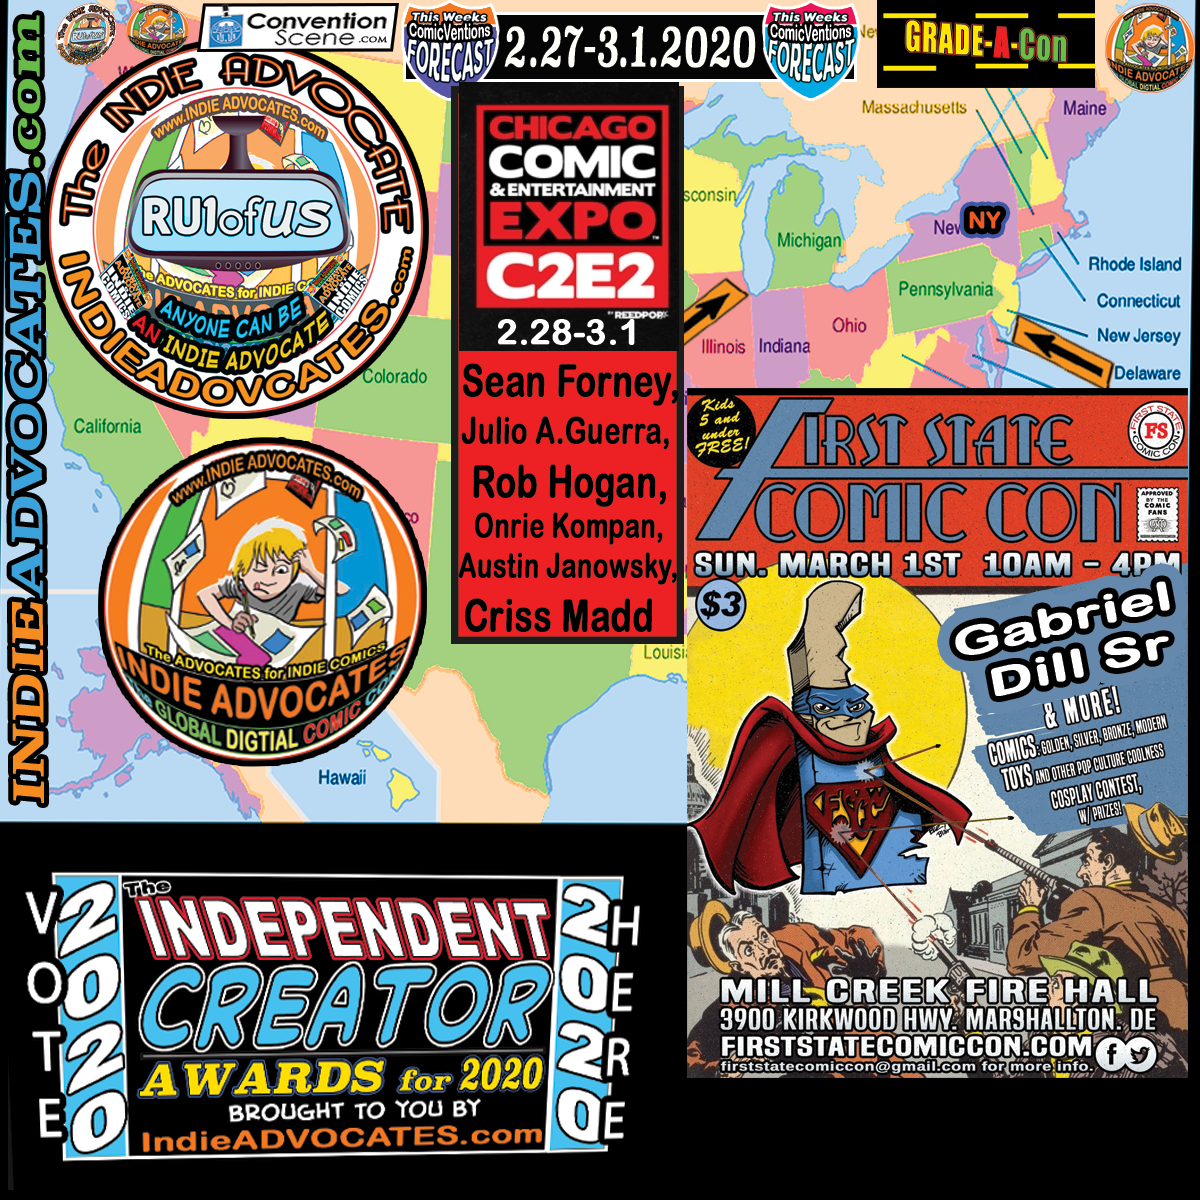 2020 ComicVentions HIGHWAY EXITS:: [2.27-3.1]-C2E2 (IL)-First State Comic Con (DE)-North Fort Myers Library Author Event (FL)